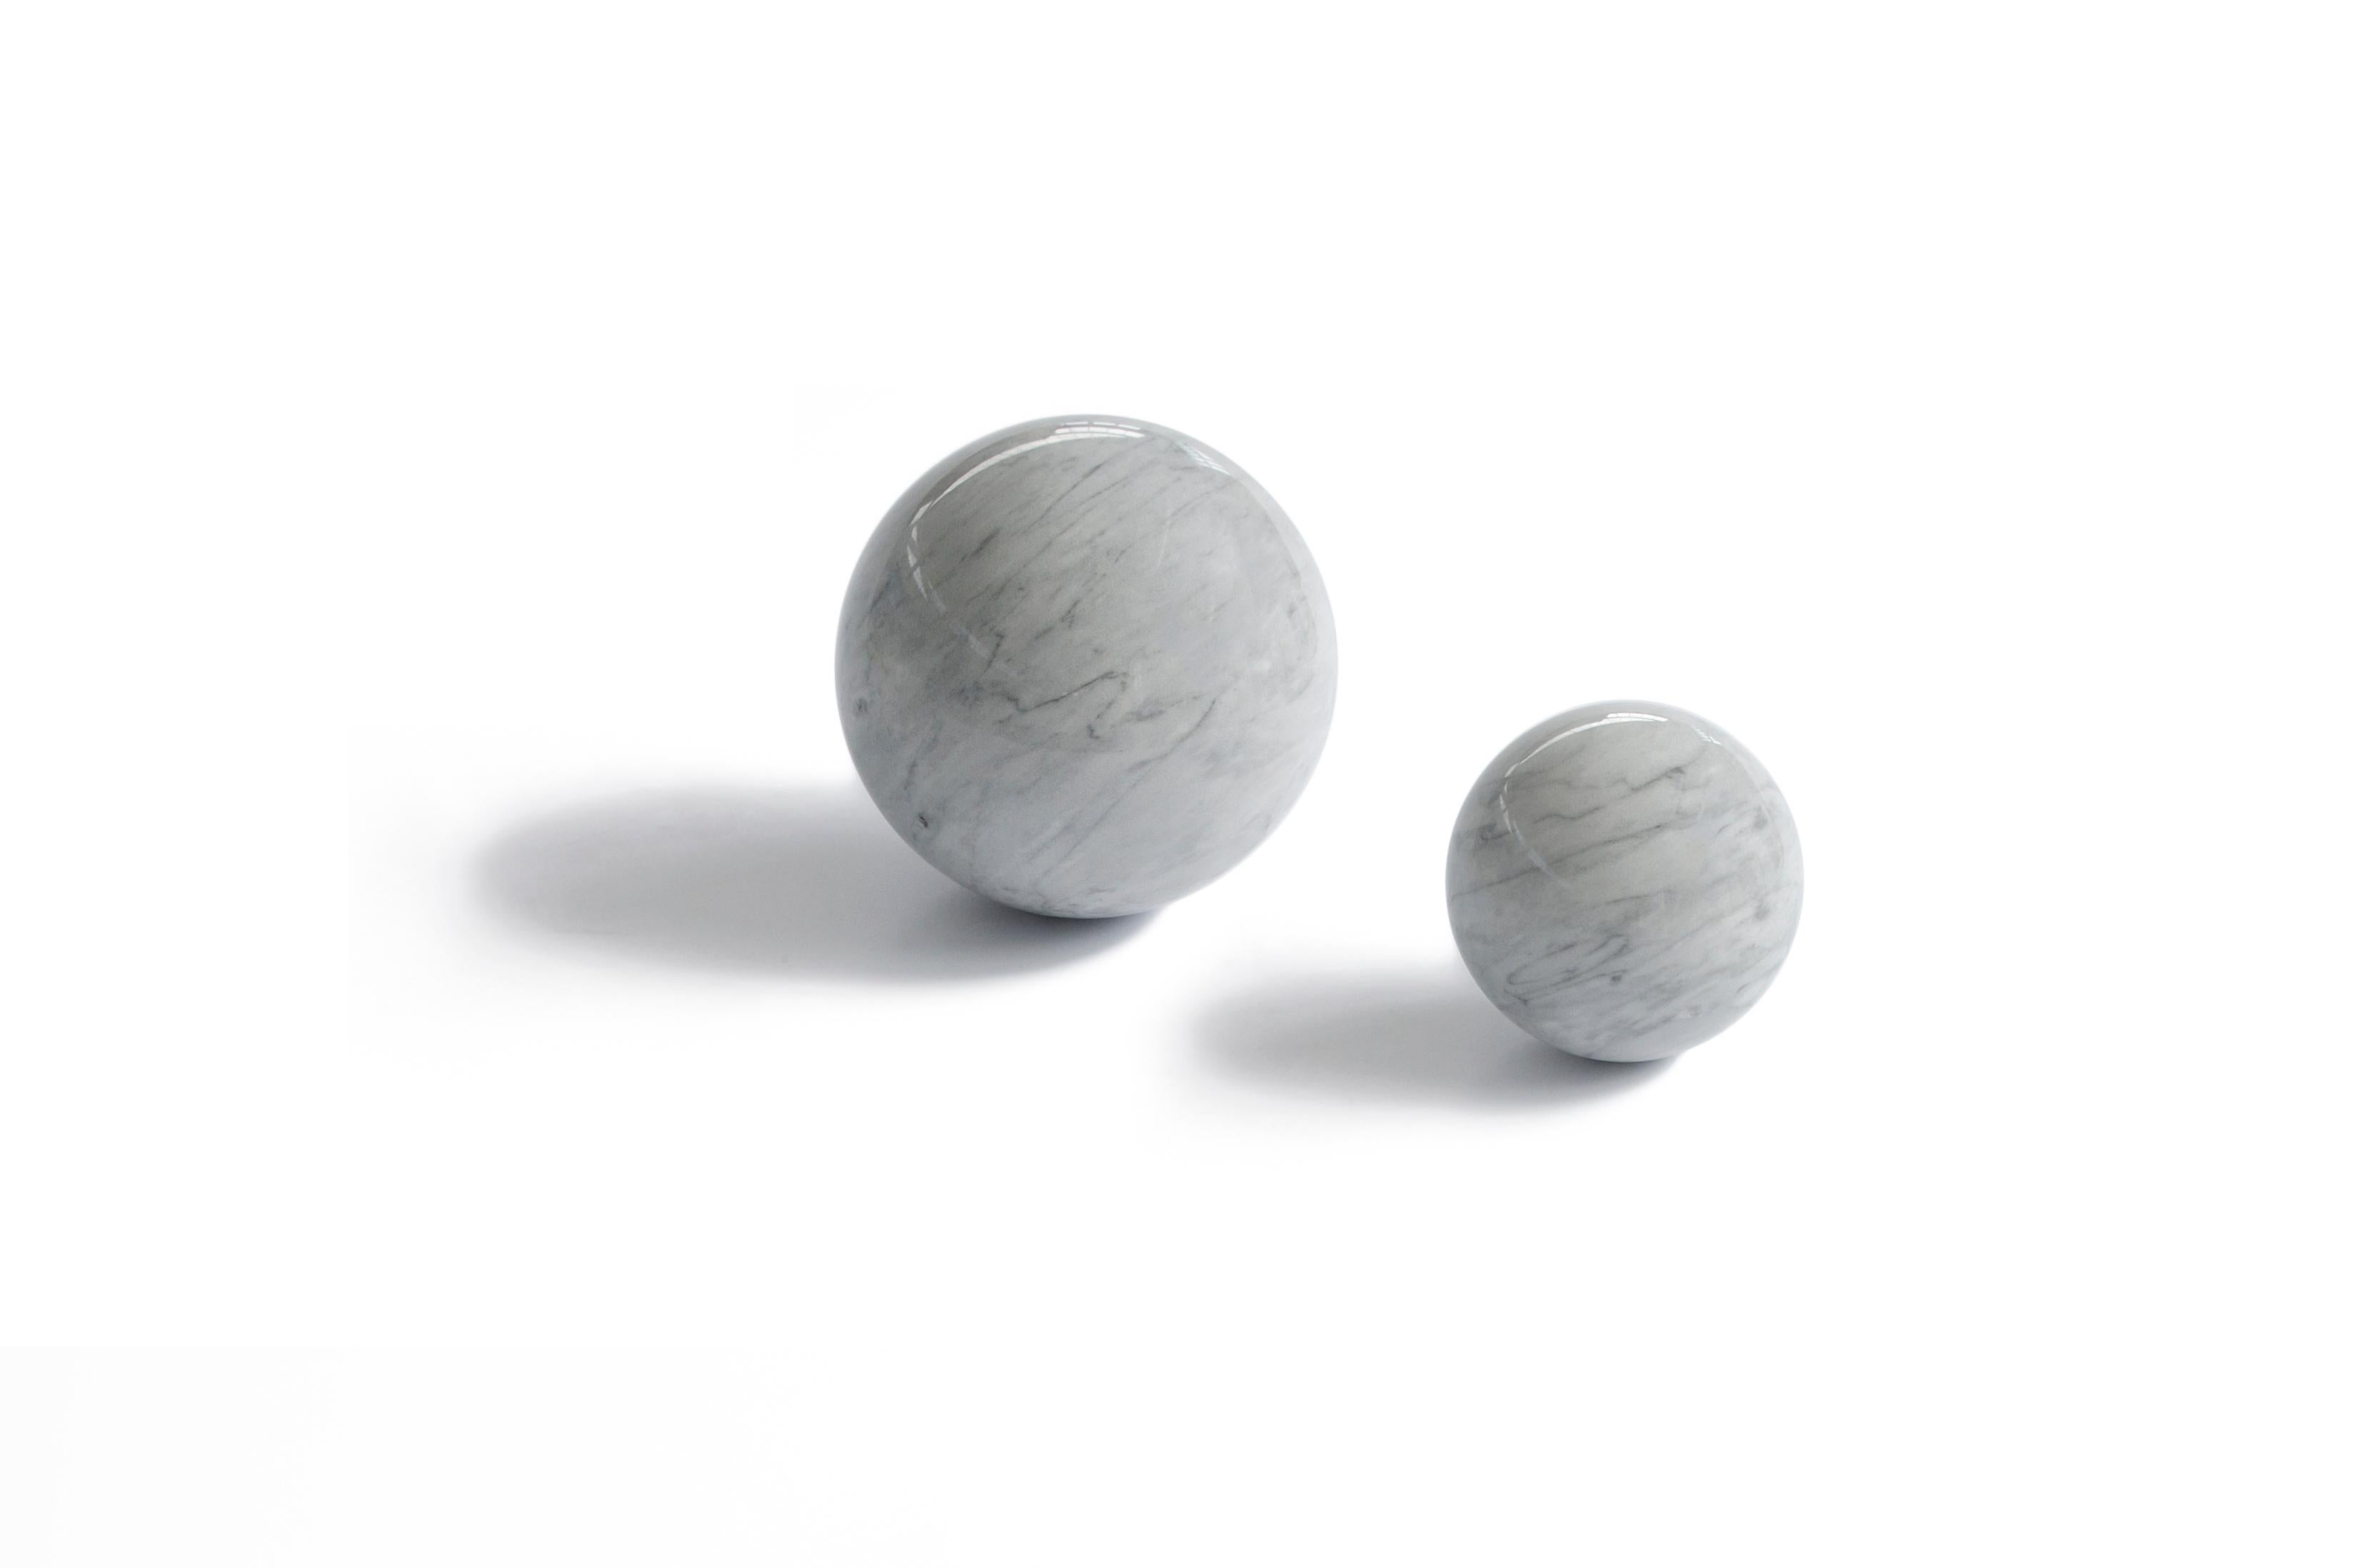 Paperweight with sphere shape in grey Bardiglio marble. Measure: Diameter 8 cm

Each piece is in a way unique (since each marble block is different in veins and shades) and handcrafted in Italy. Slight variations in shape, color and size are to be